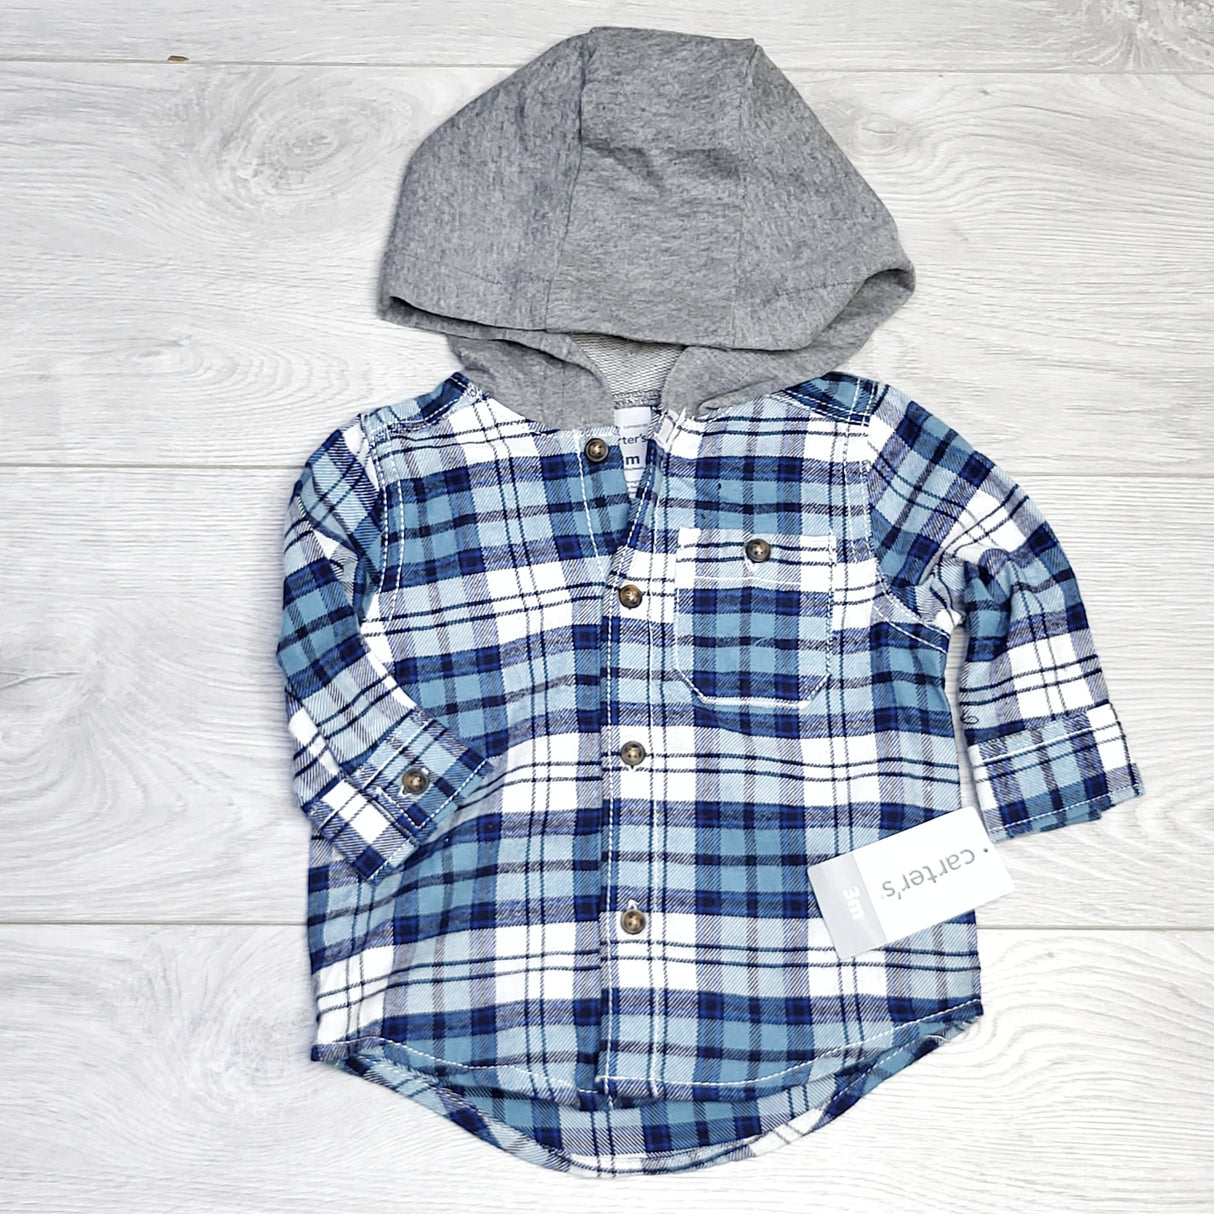 MSNDS11 - NEW - Carters blue plaid hooded button down flannel shirt. Size 3 months